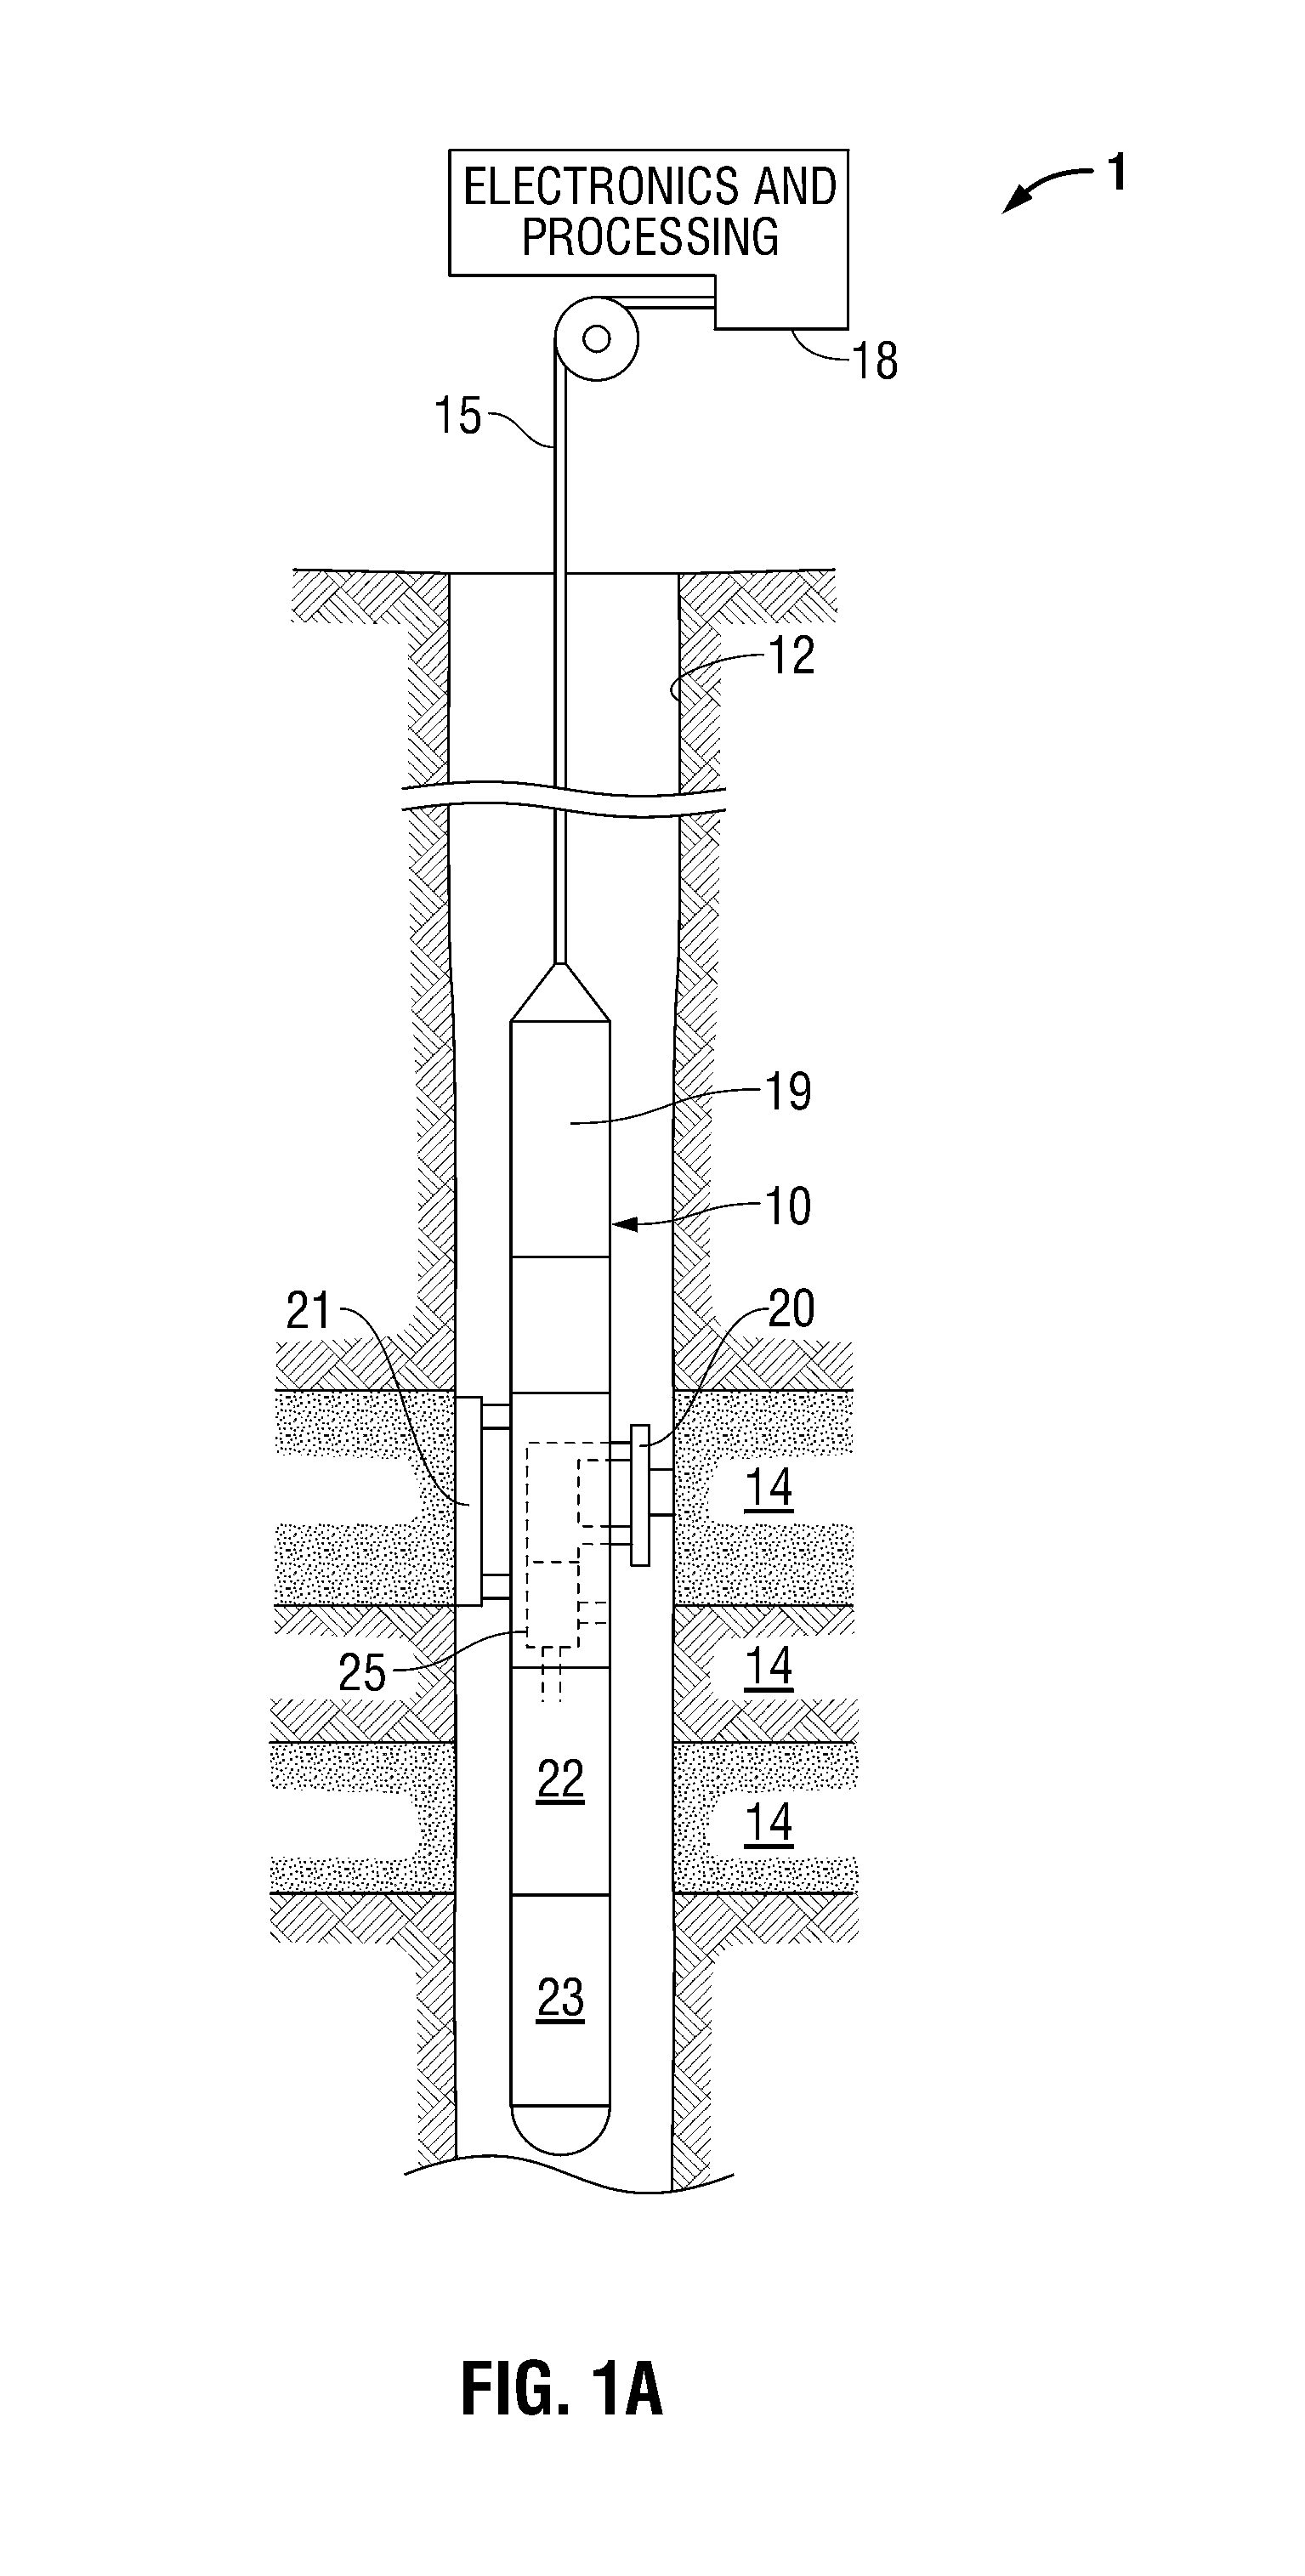 Methods and apparatus for characterization of petroleum fluids contaminated with drilling mud